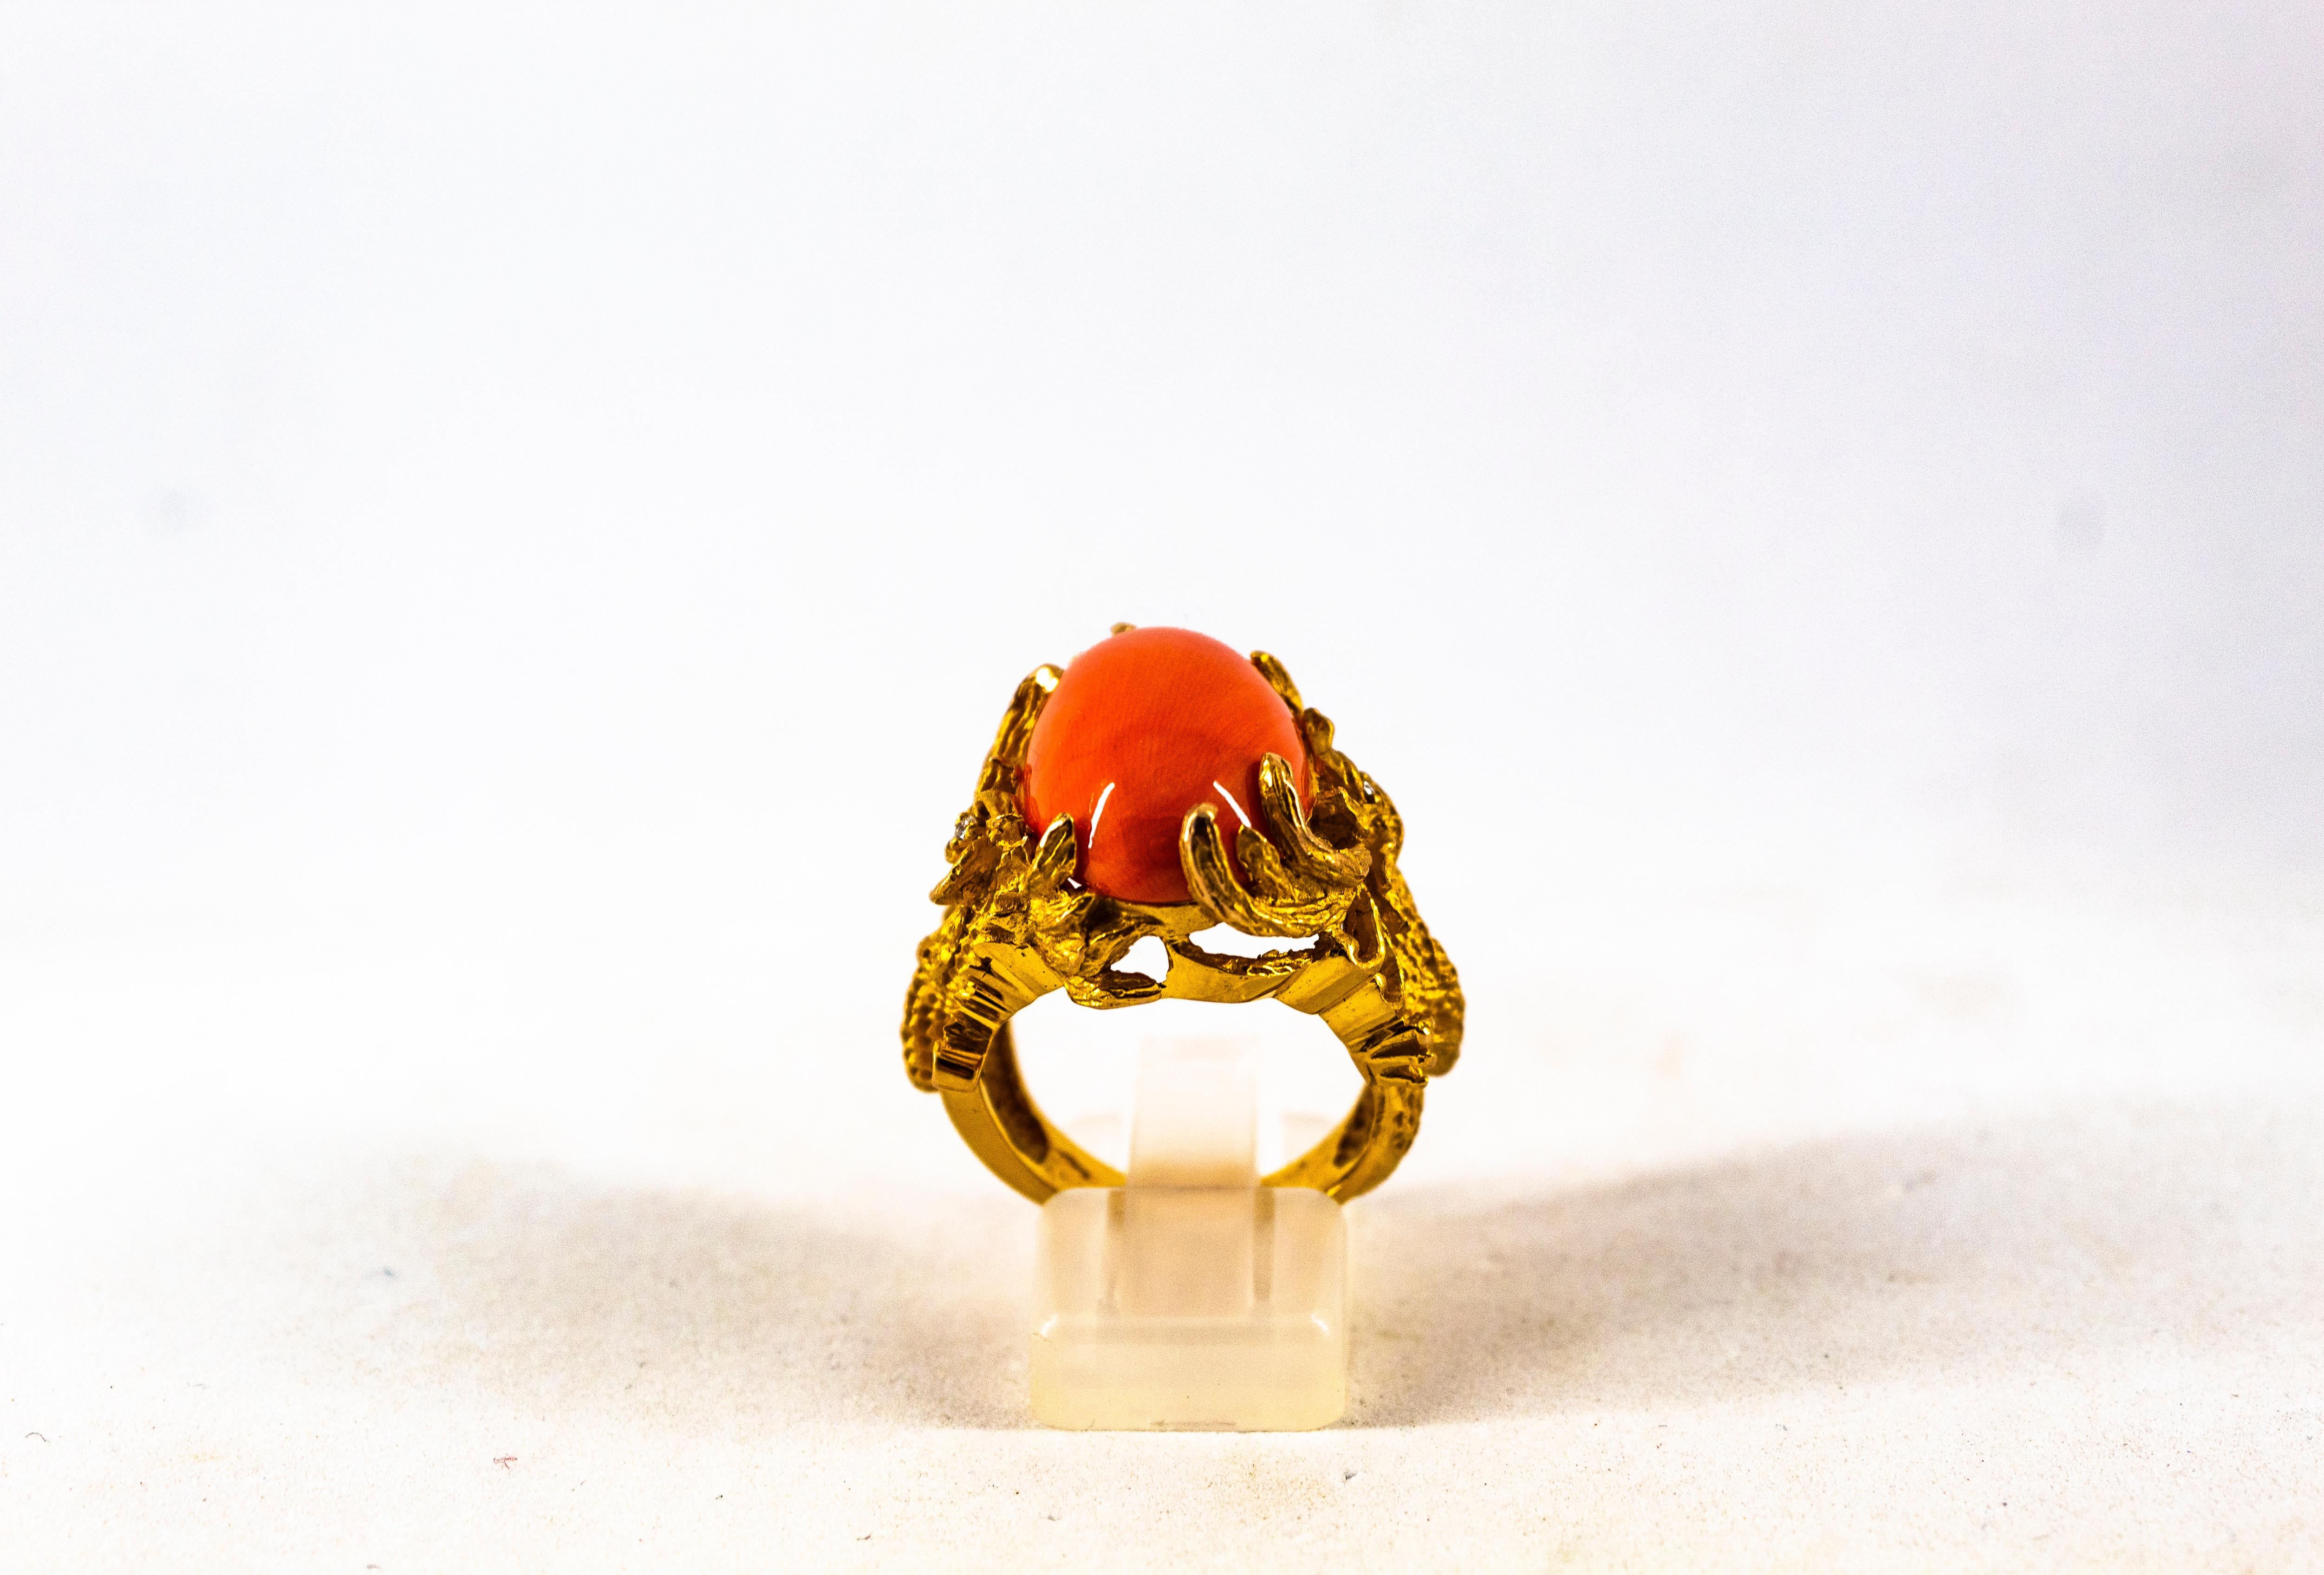 This Ring is made of 14K Yellow Gold.
This Ring is available also in 18K Yellow or White Gold.
This Ring has 0.02 Carats of White Diamonds.
This Ring has a 18.50 Carats (3.70 Grams) Cabochon Cut Mediterranean (Sardinia, Italy) Orange Coral.
This